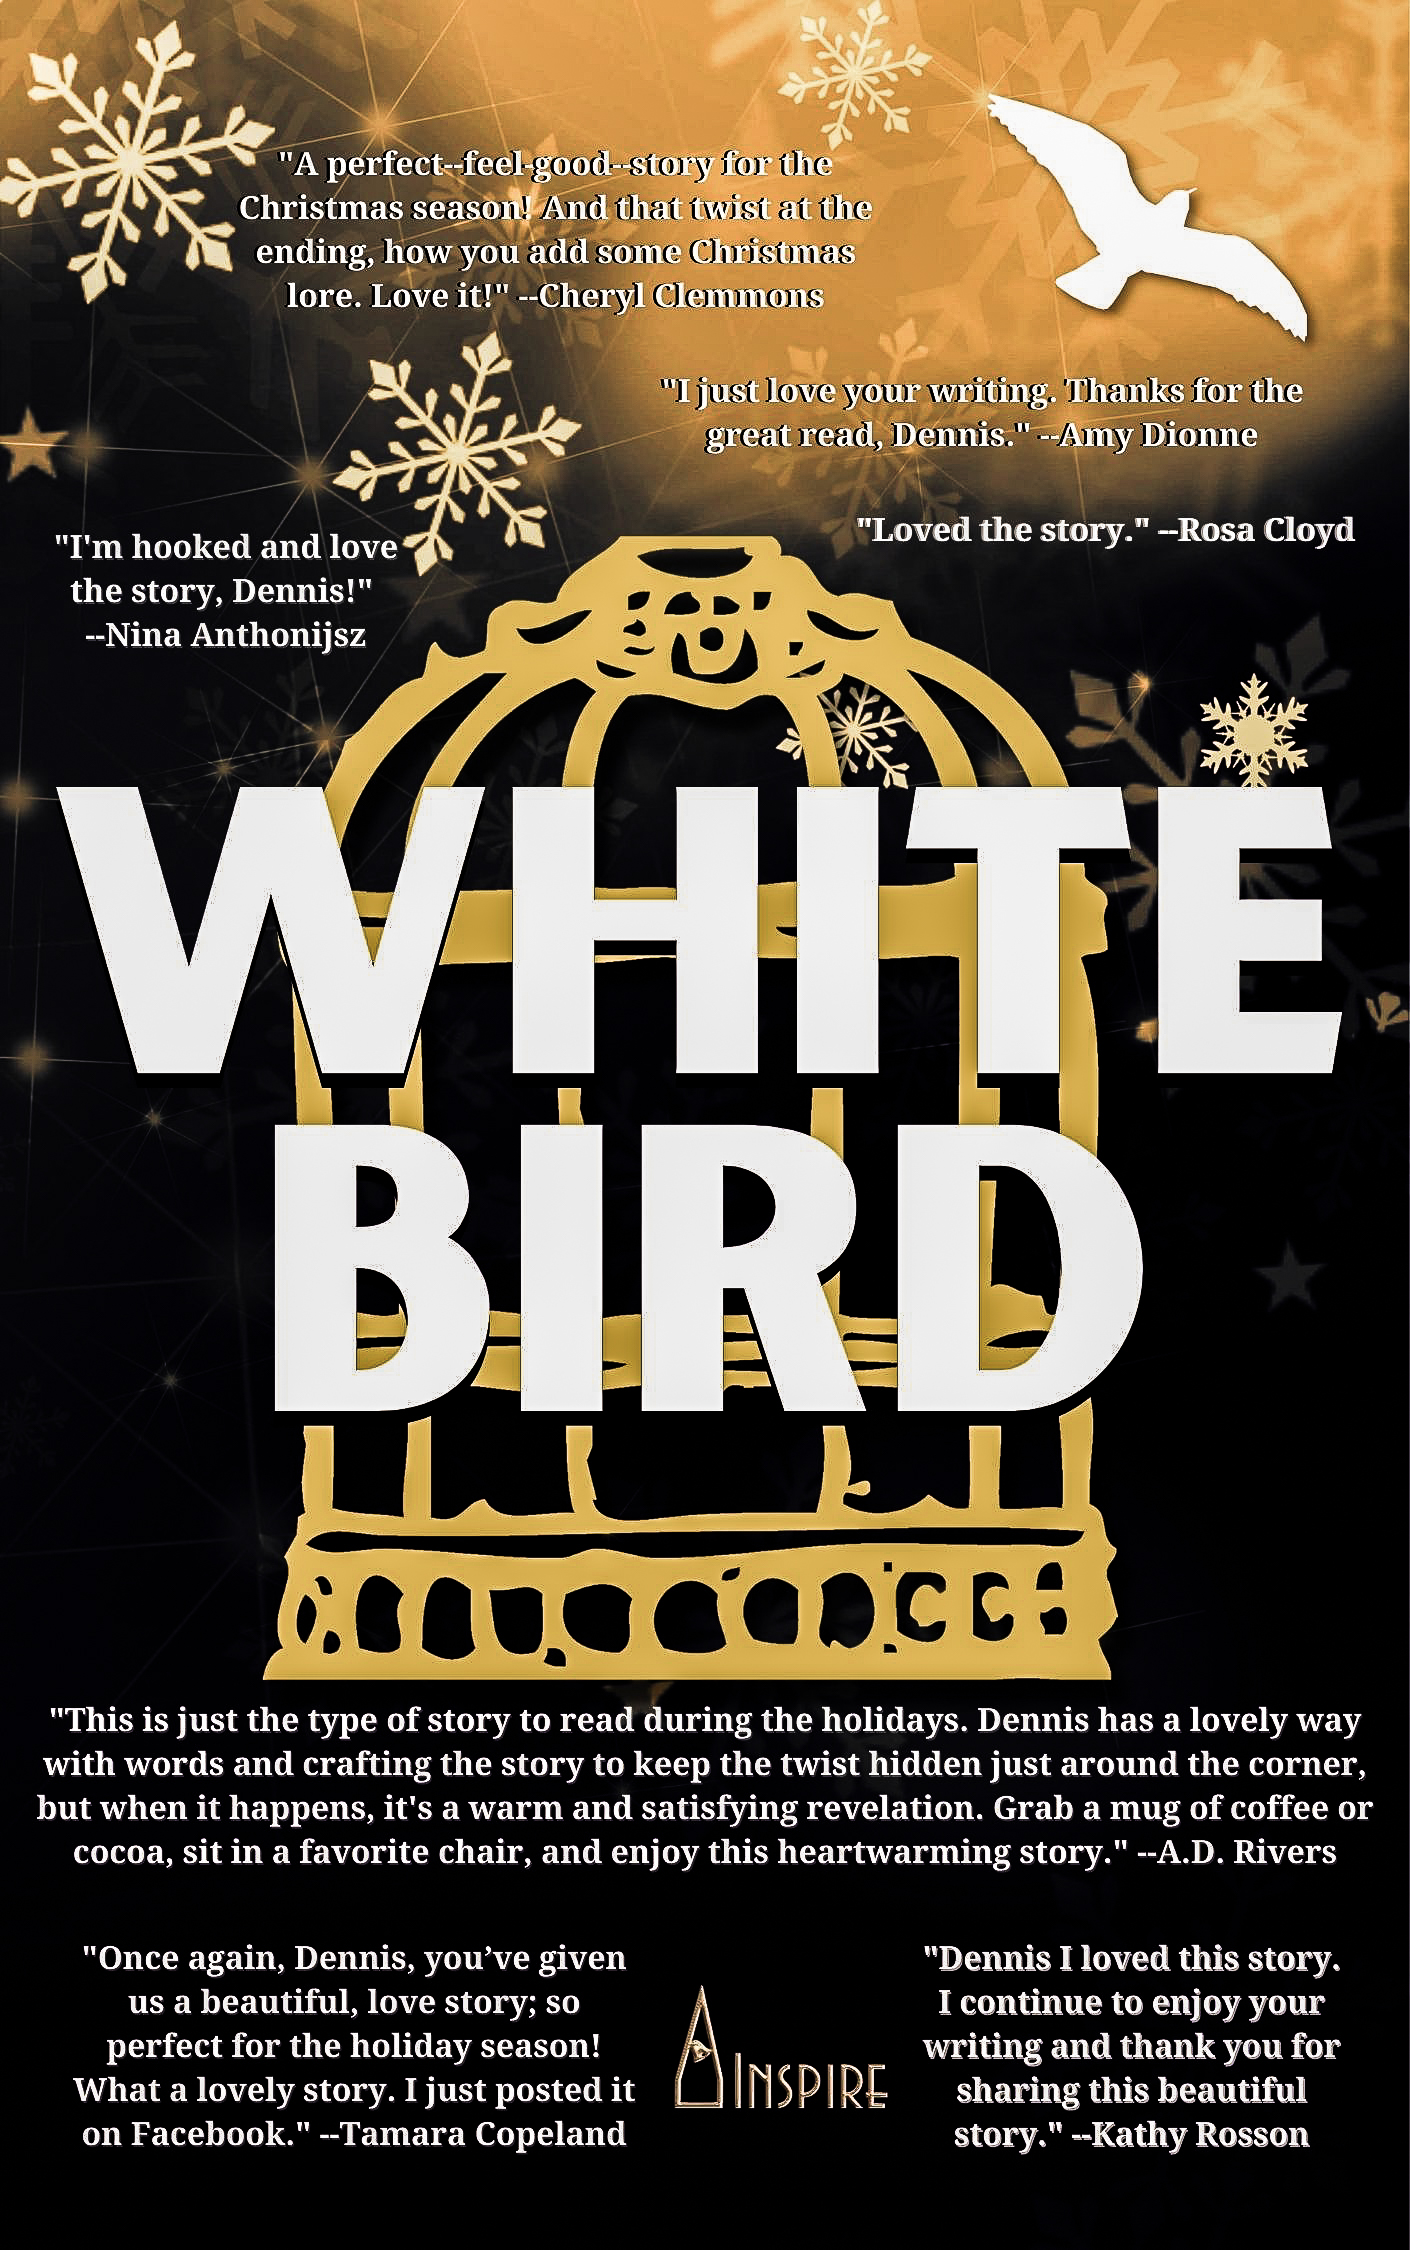 WHITE BIRD (2022) A Christmas Story from Dennis Lowery